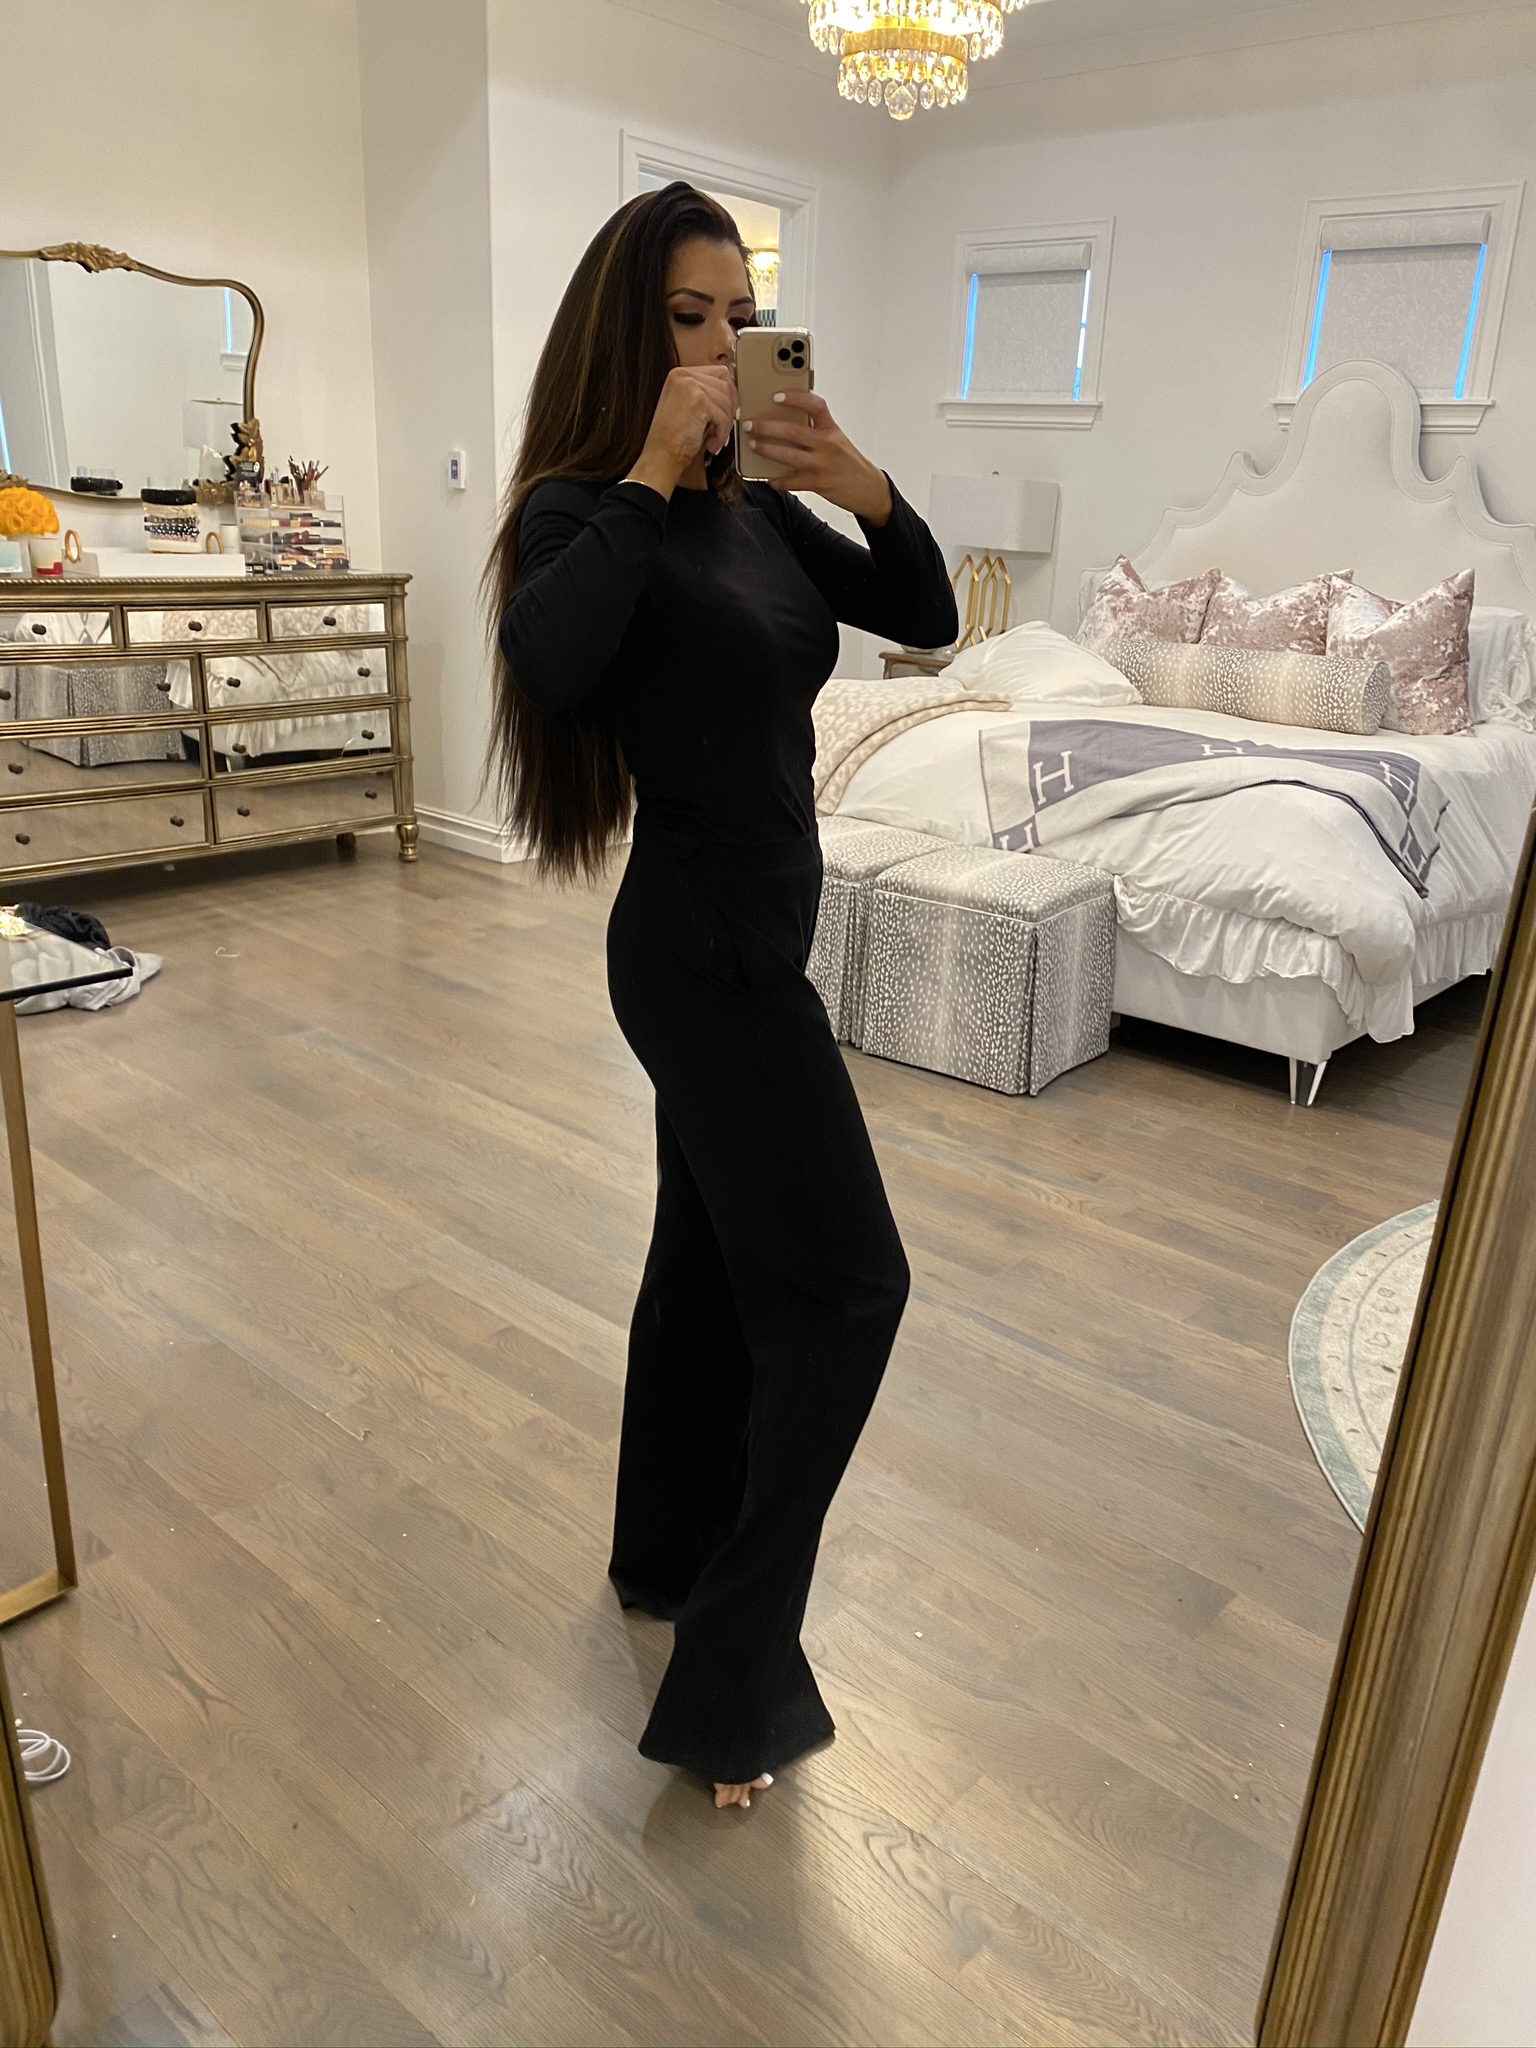 Instagram Recap by popular US fashion blog, The Sweetest Thing: image of a woman wearing a Verishop LETT Montreal Rib Top and a Verishop LETT Heathrow Wide Leg Pant.